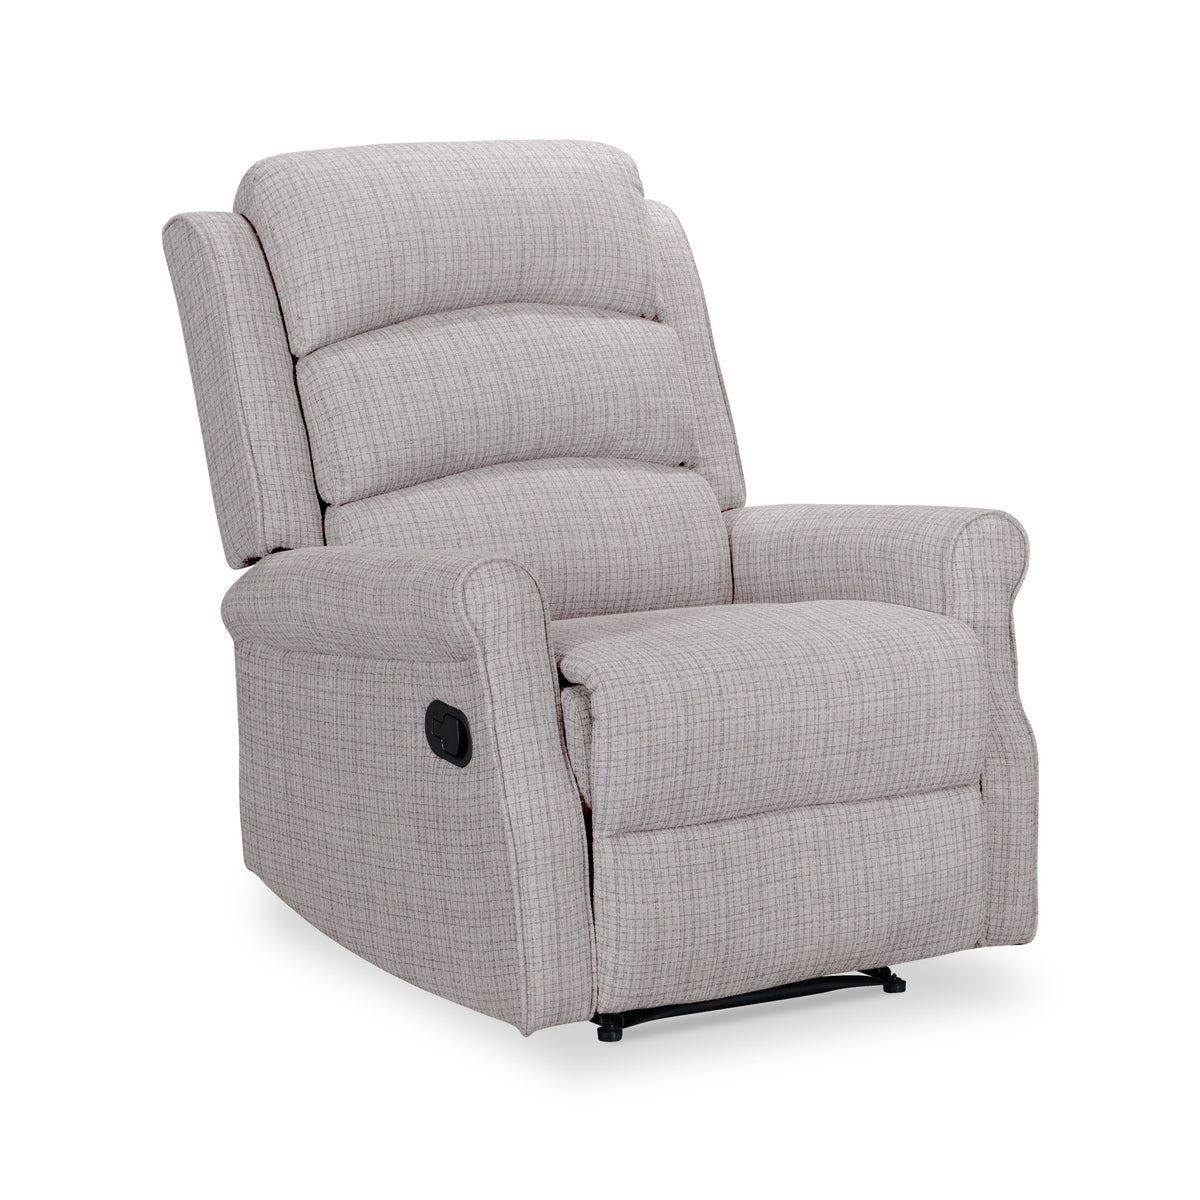 Edwin Natural Beige Manual Recliner Chair from Roseland